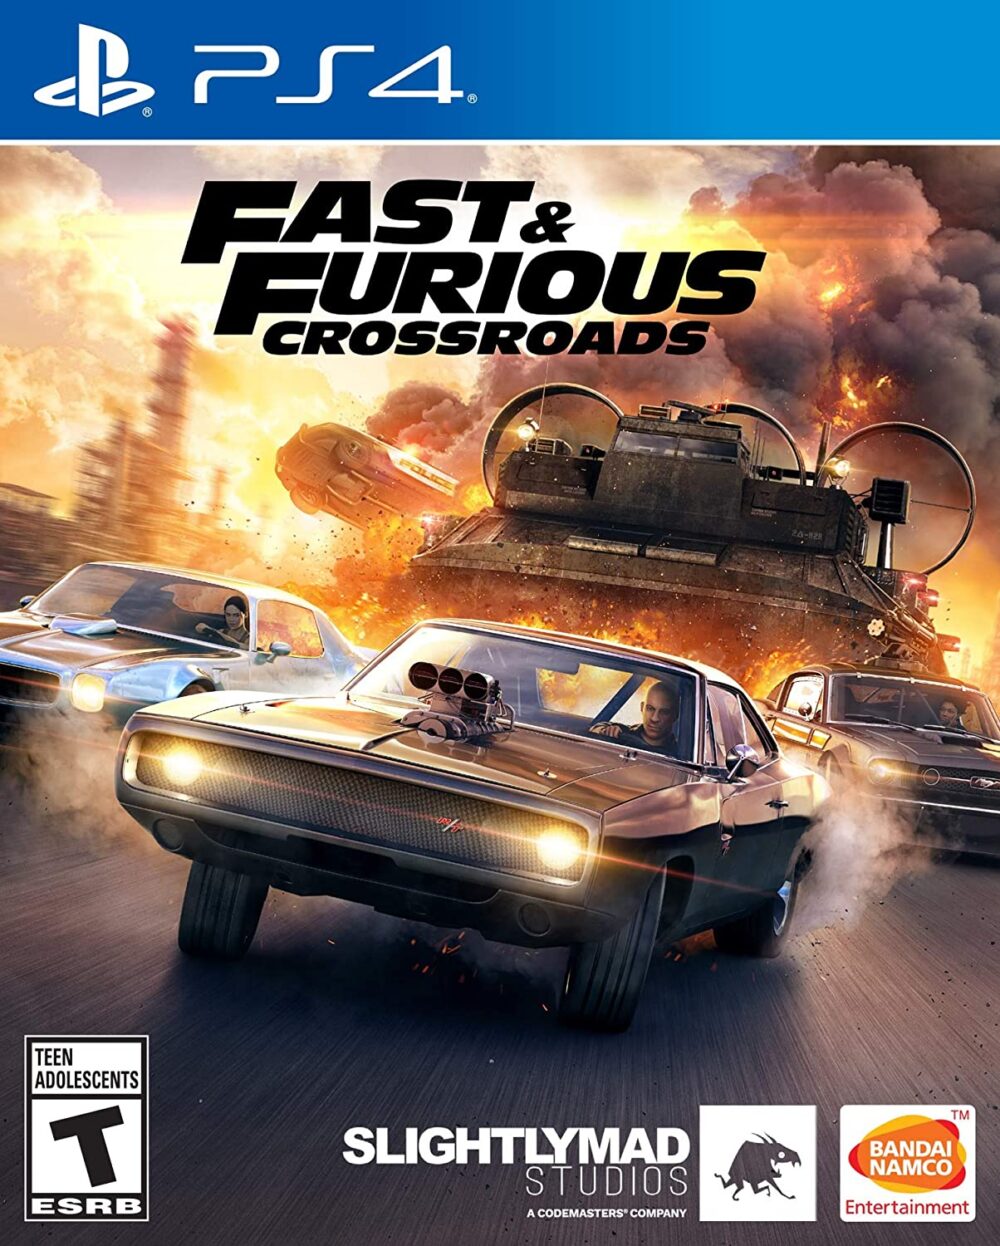 Fast & Furious Crossroads for PS4 (Video Game)